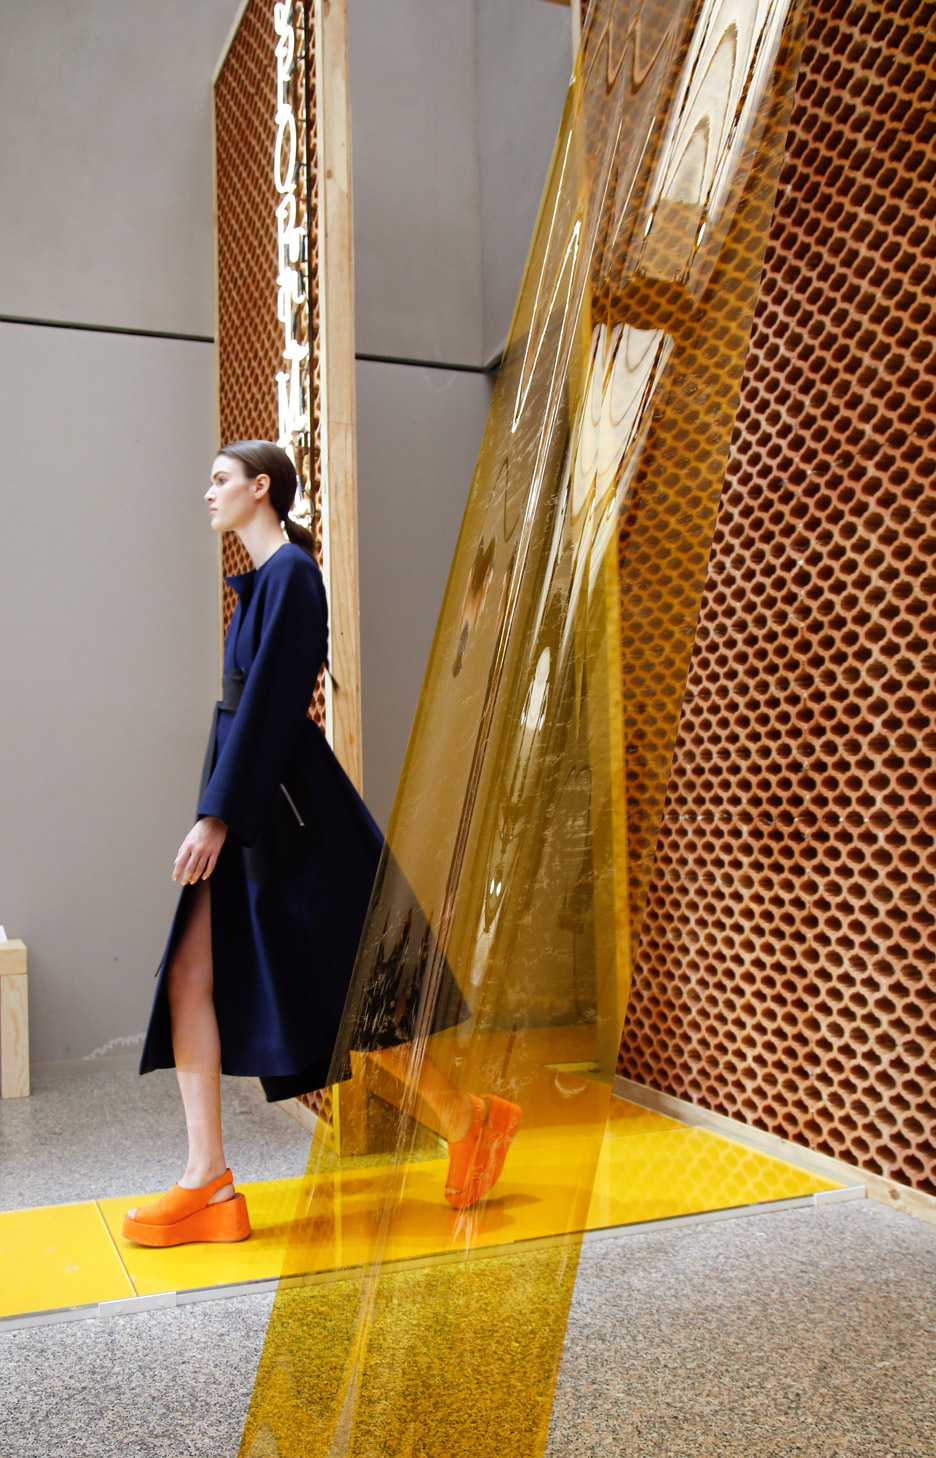 Formafantasma Uses Terracotta And PVC To Create “deconstructed Architecture” For Sportmax Catwalk